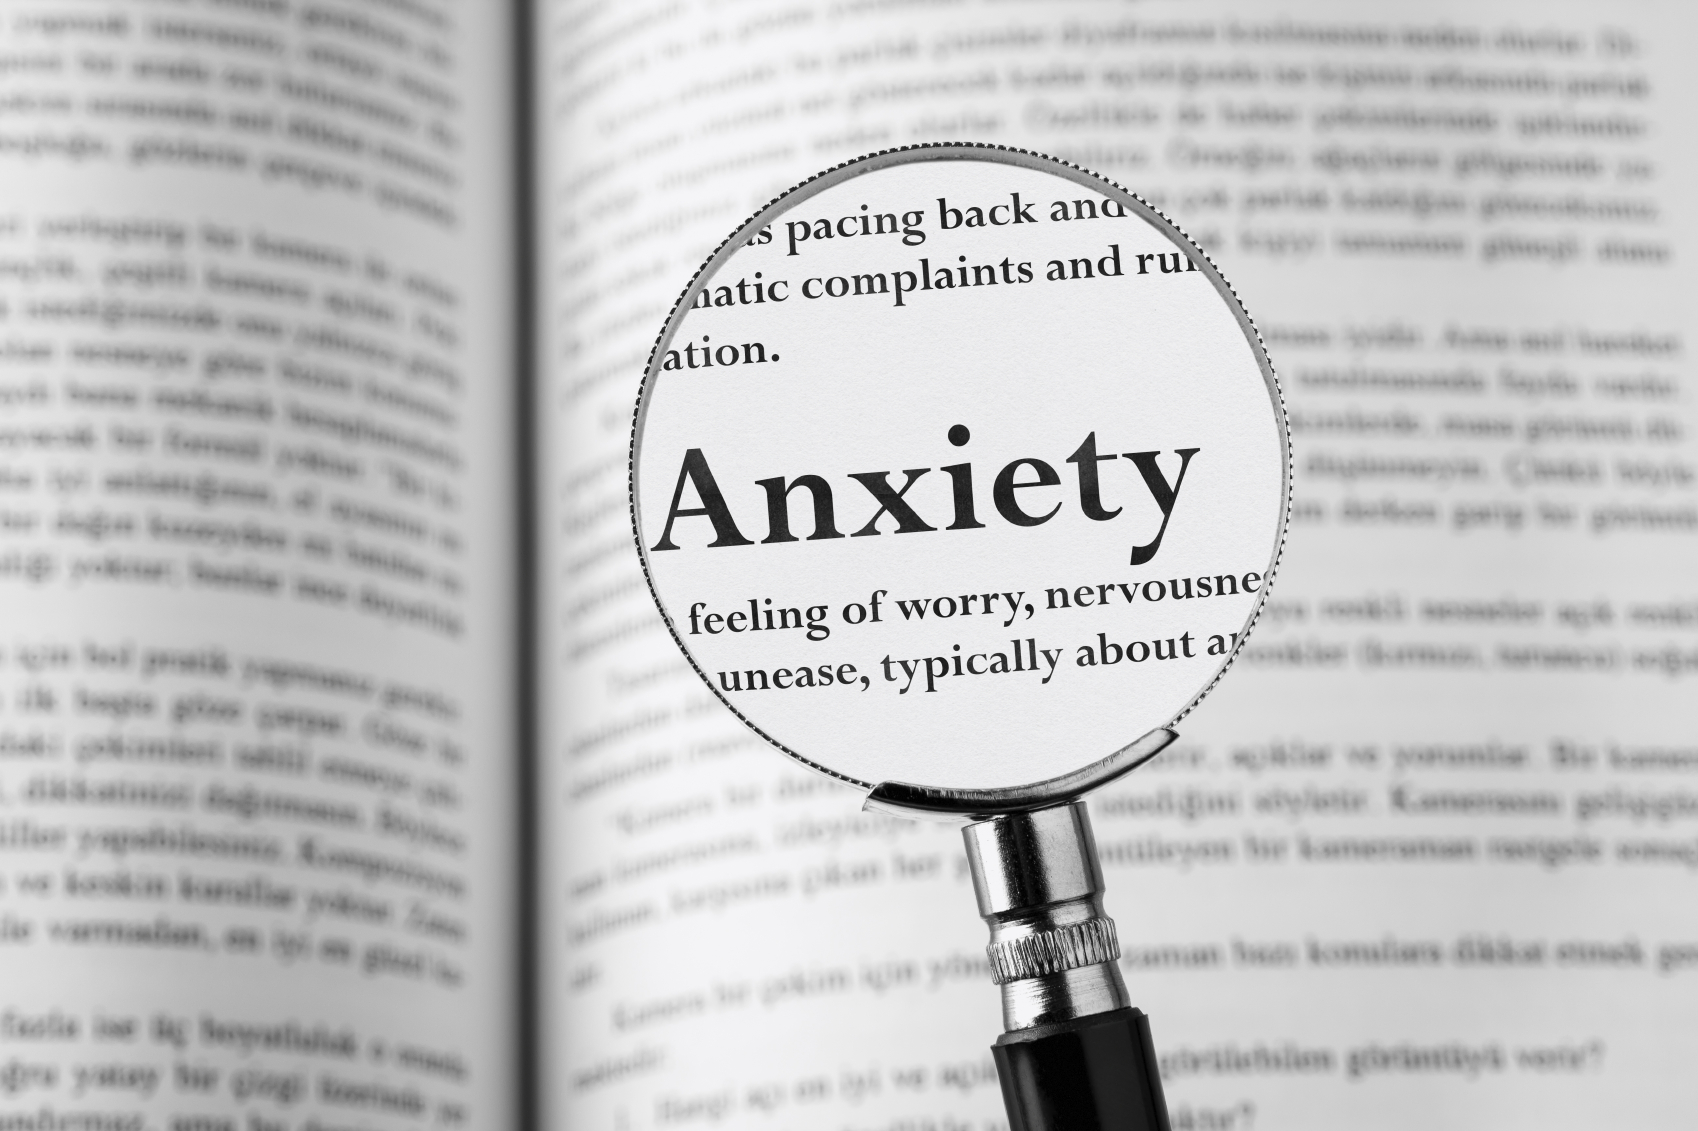 Managing worry in generalized anxiety disorder - Harvard Health Blog ...